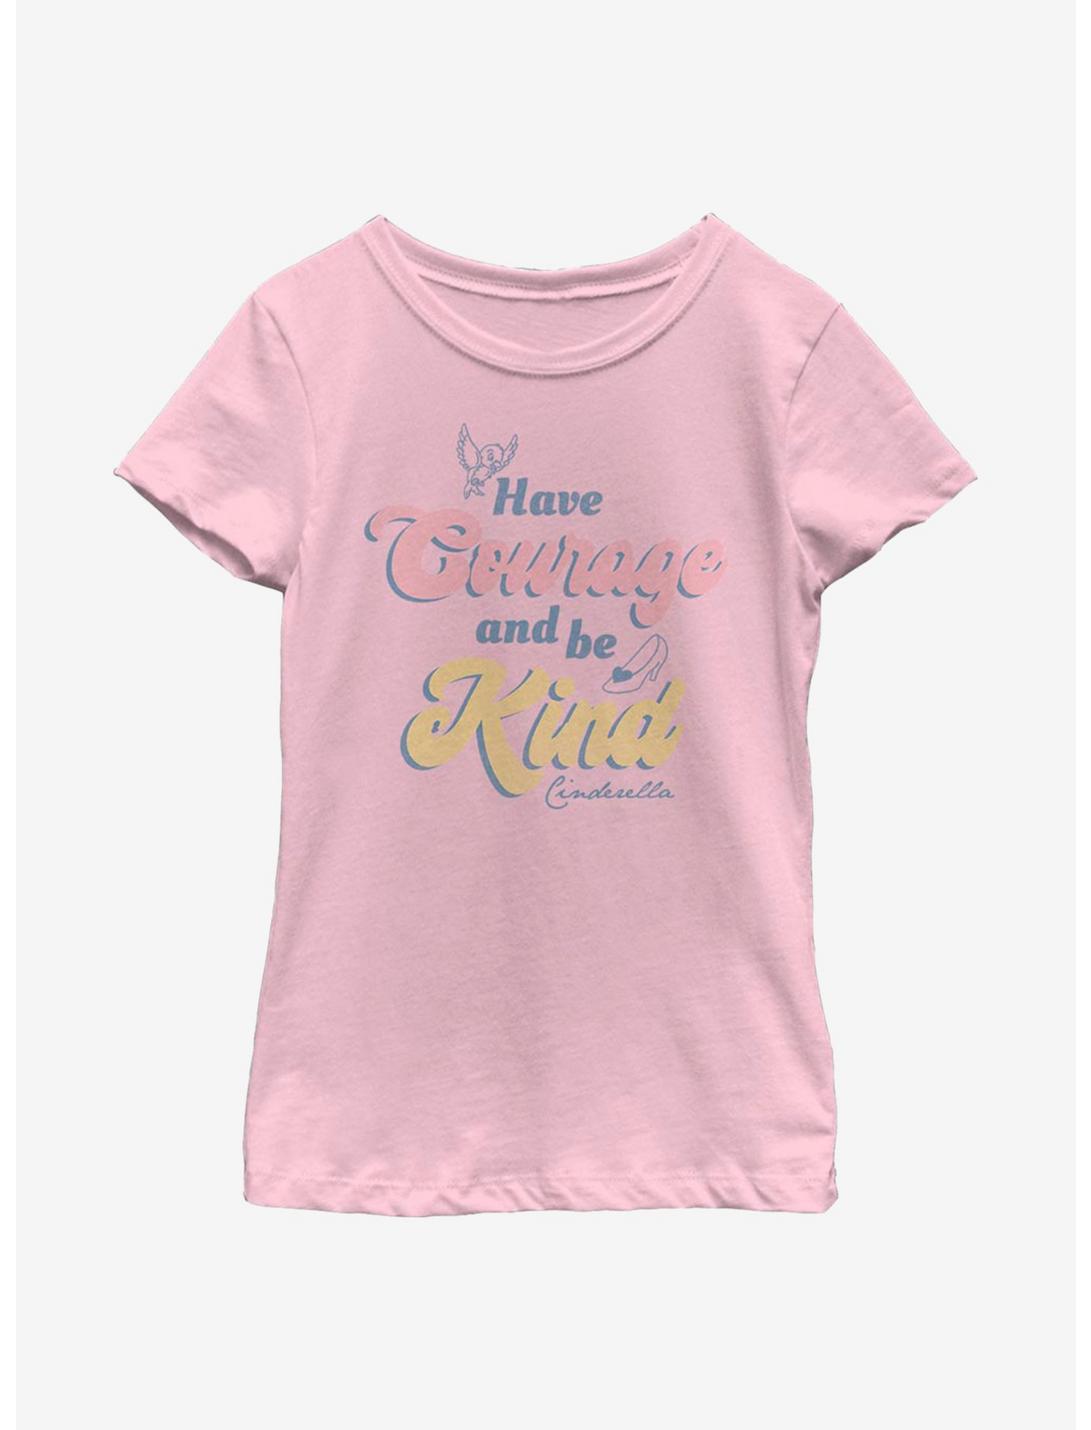 Disney Cinderella Courage And Kindness Youth Girls T-Shirt, PINK, hi-res